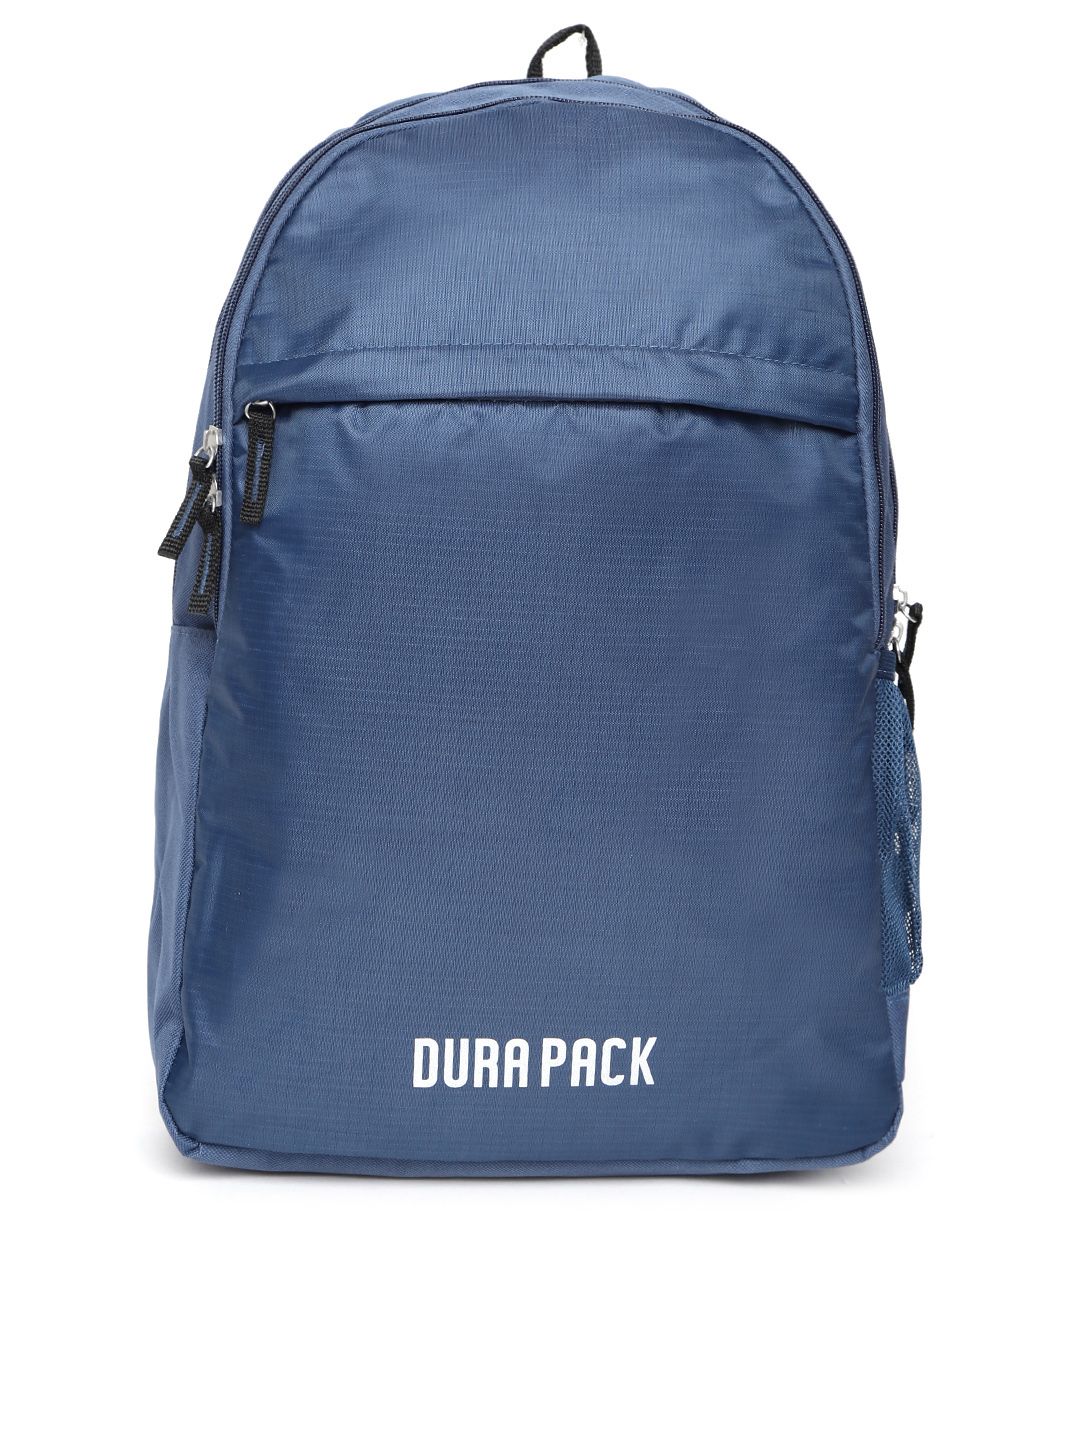 Durapack Unisex Blue Solid Backpack Price in India